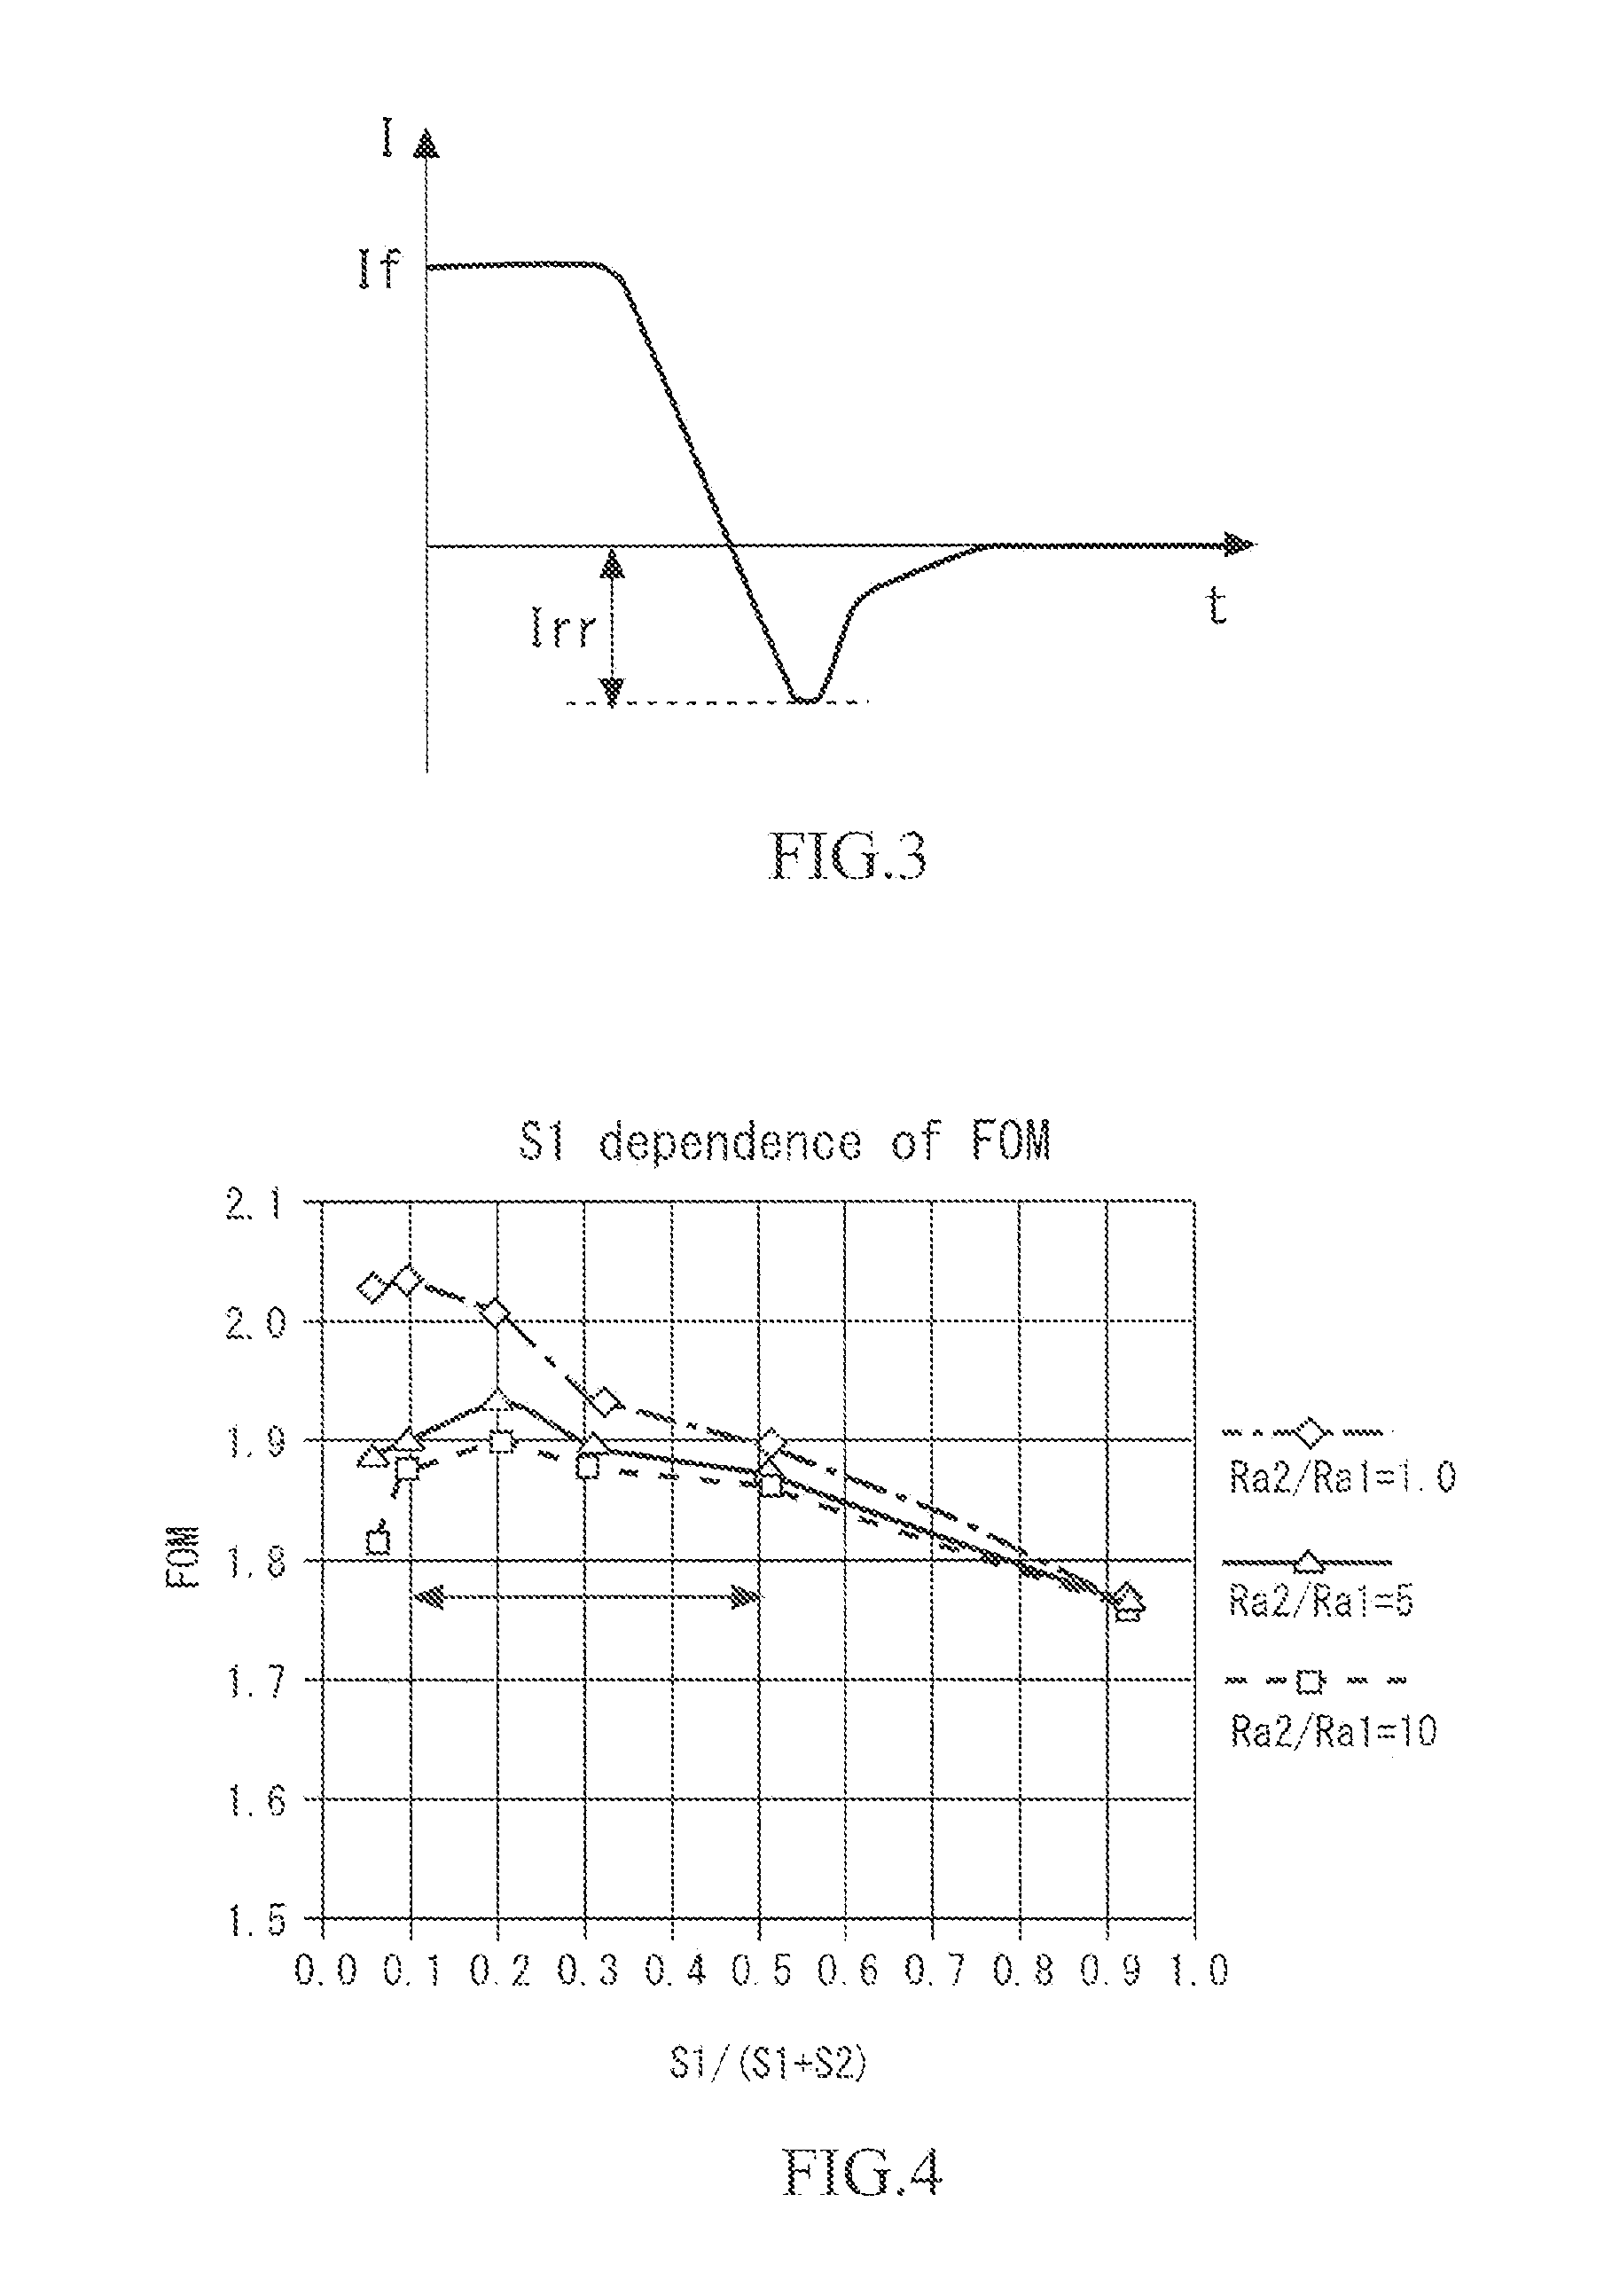 Reverse conducting semiconductor device